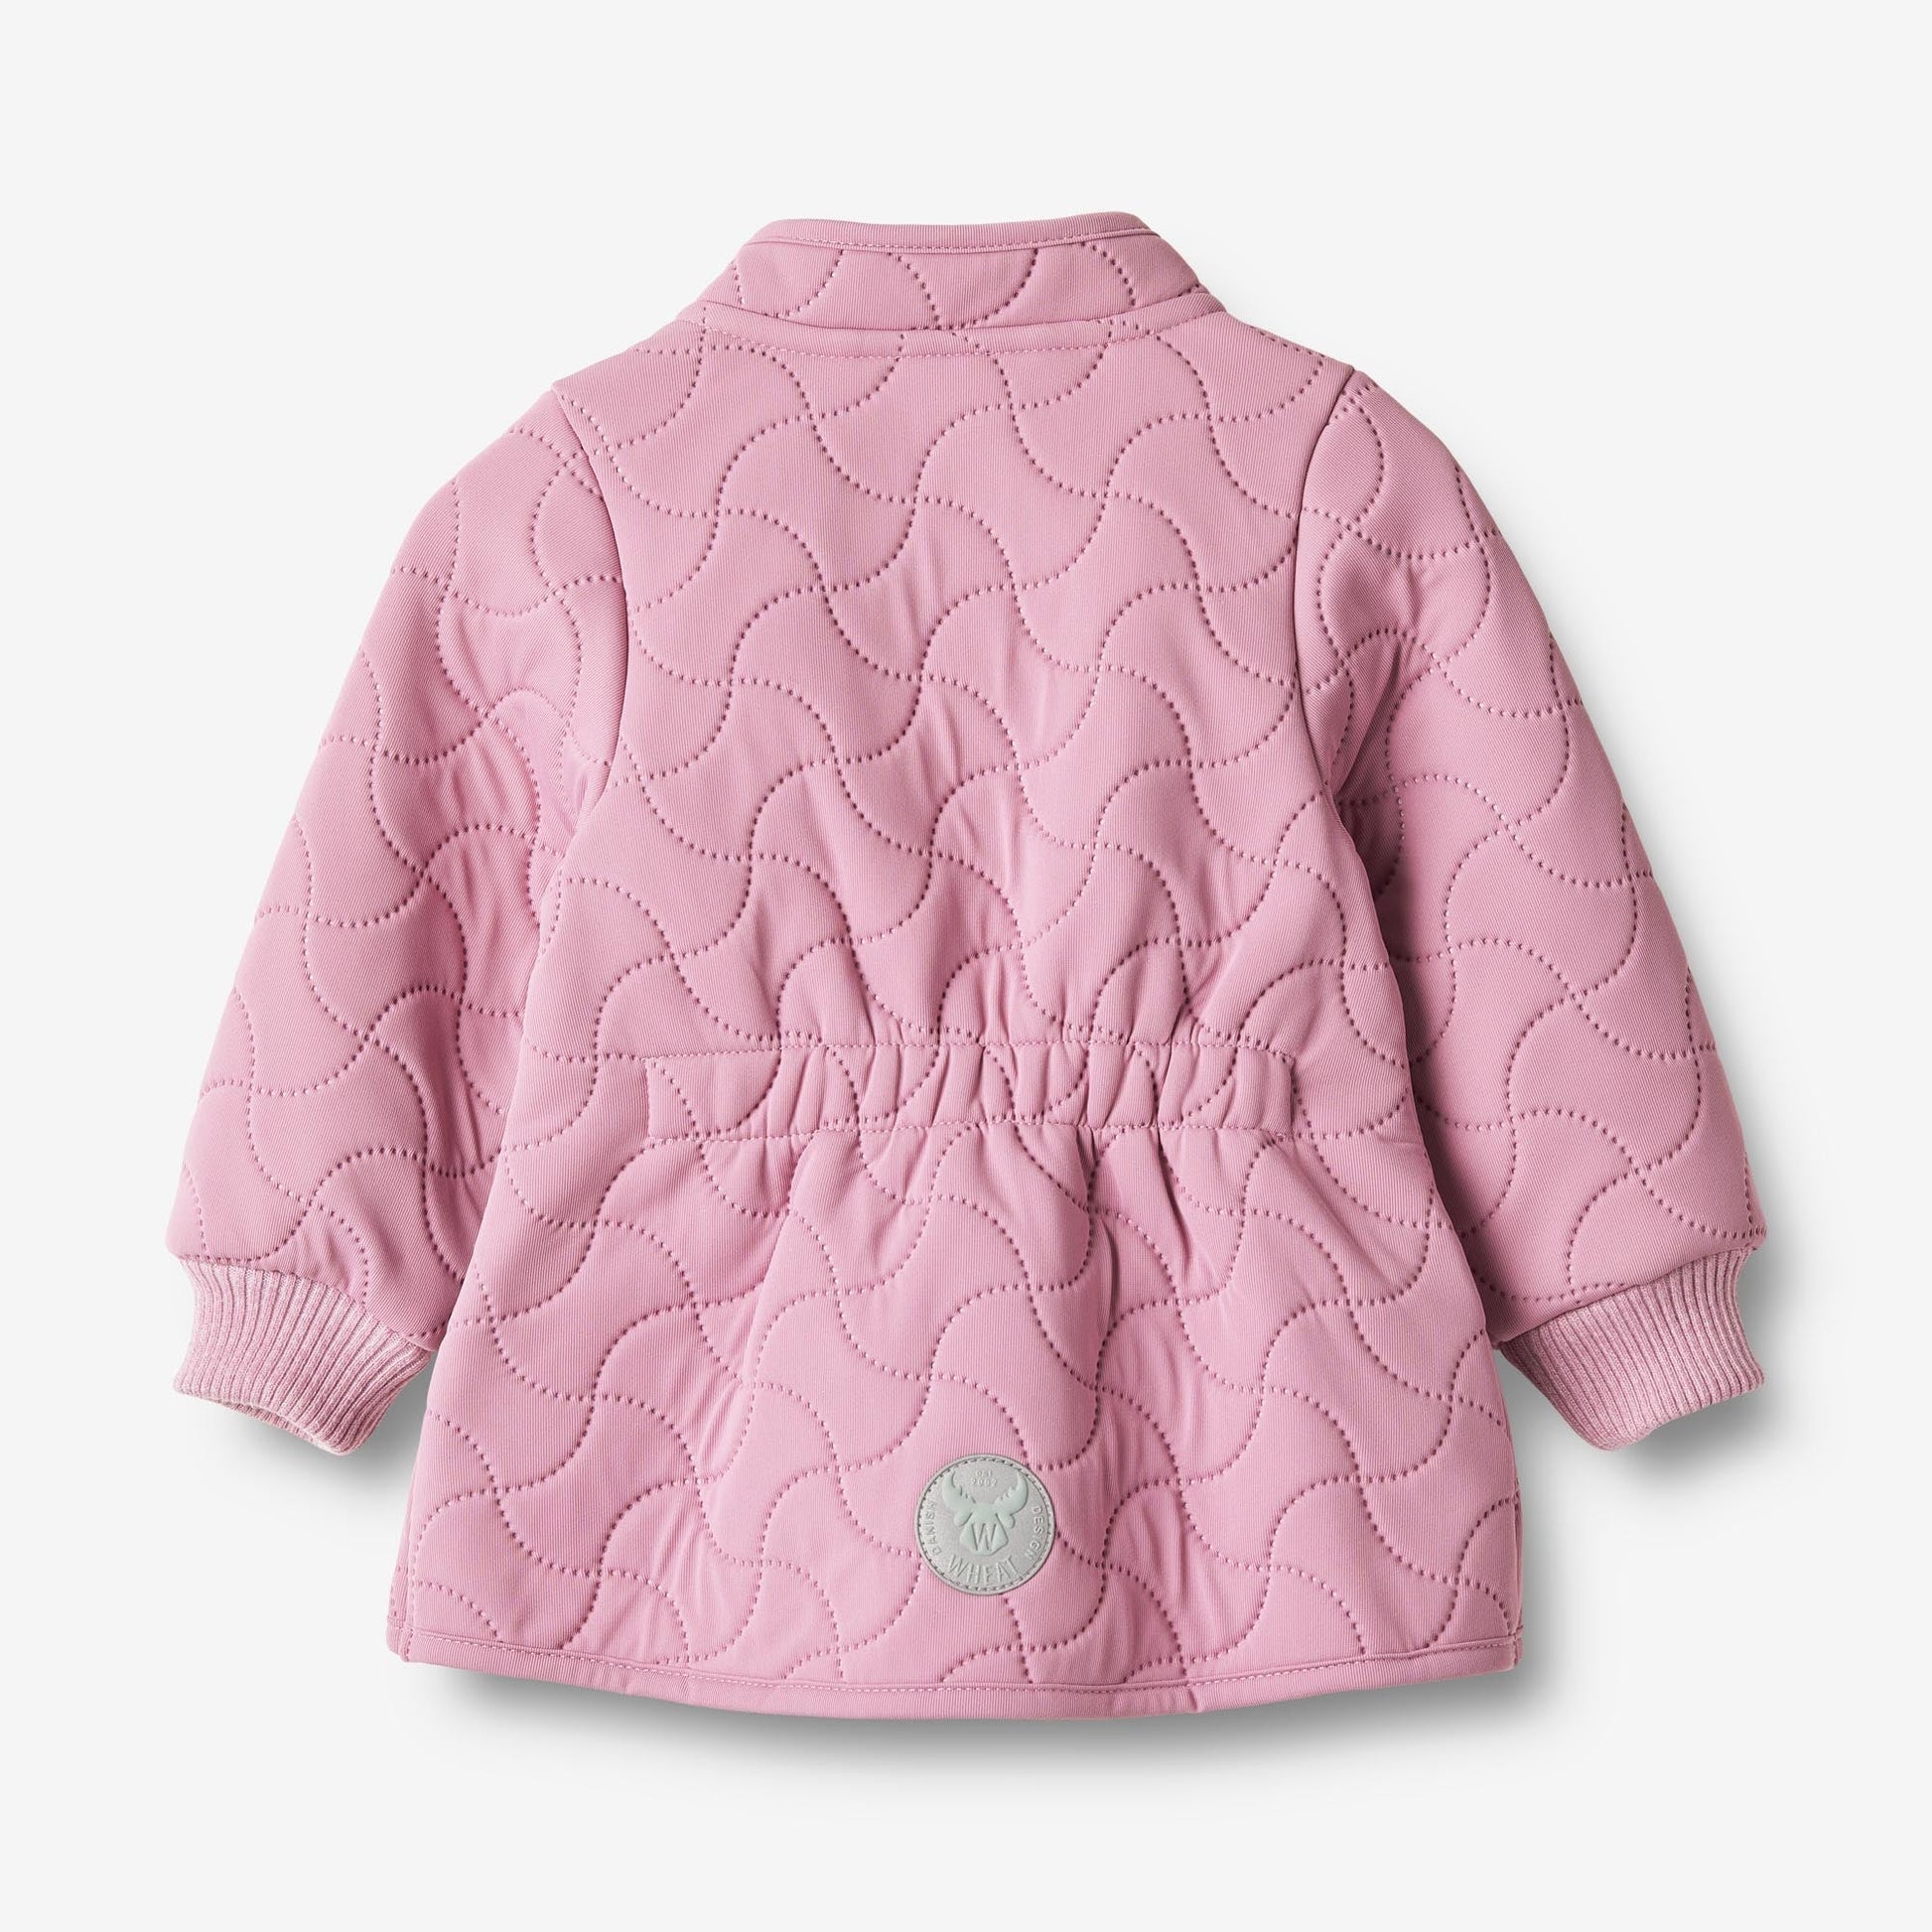 Wheat 'Thilde' Baby Thermo Jacket - Spring Lilac